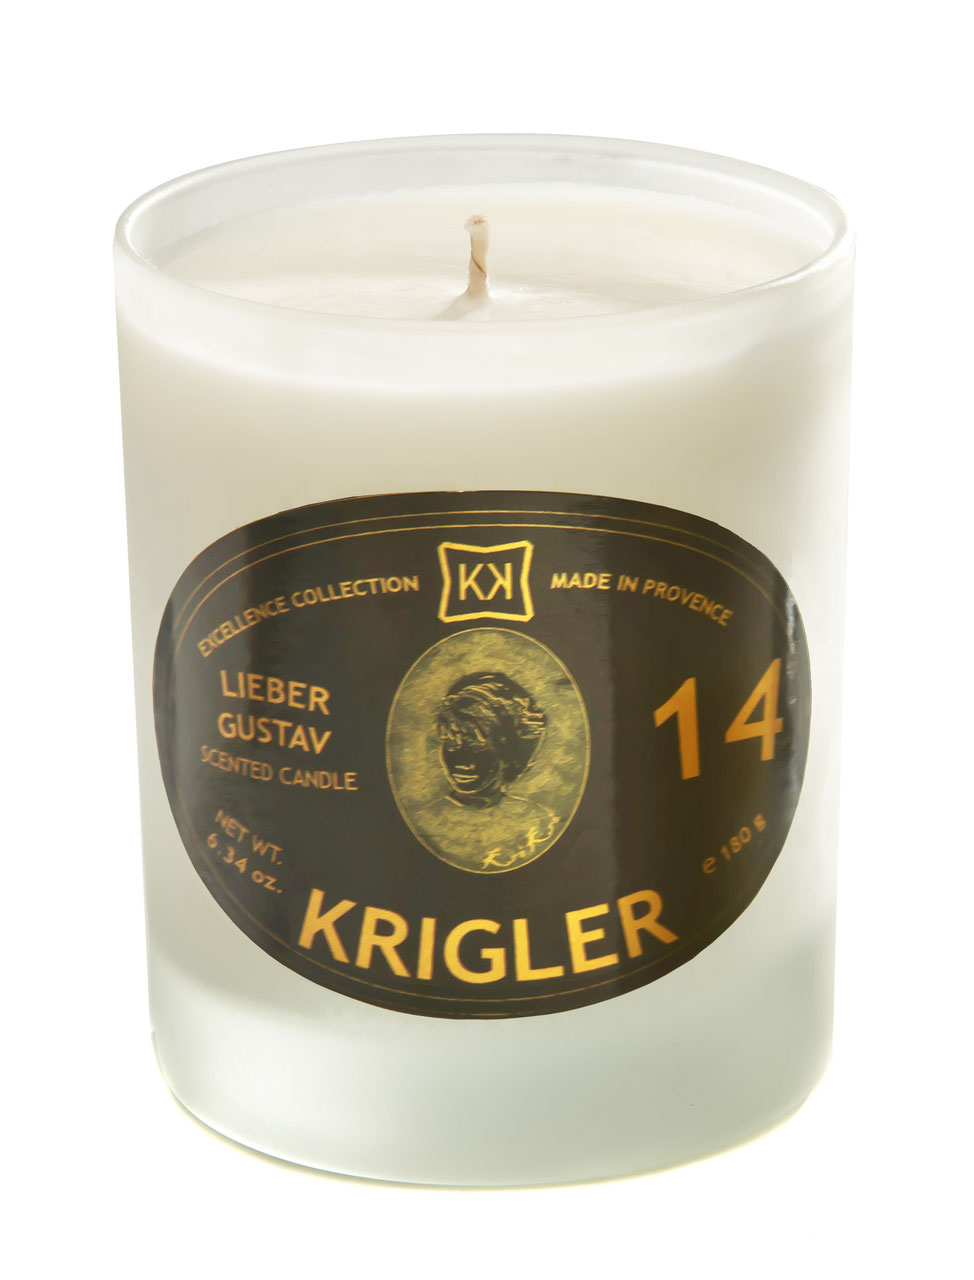 LIEBER GUSTAV 14 Scented candle